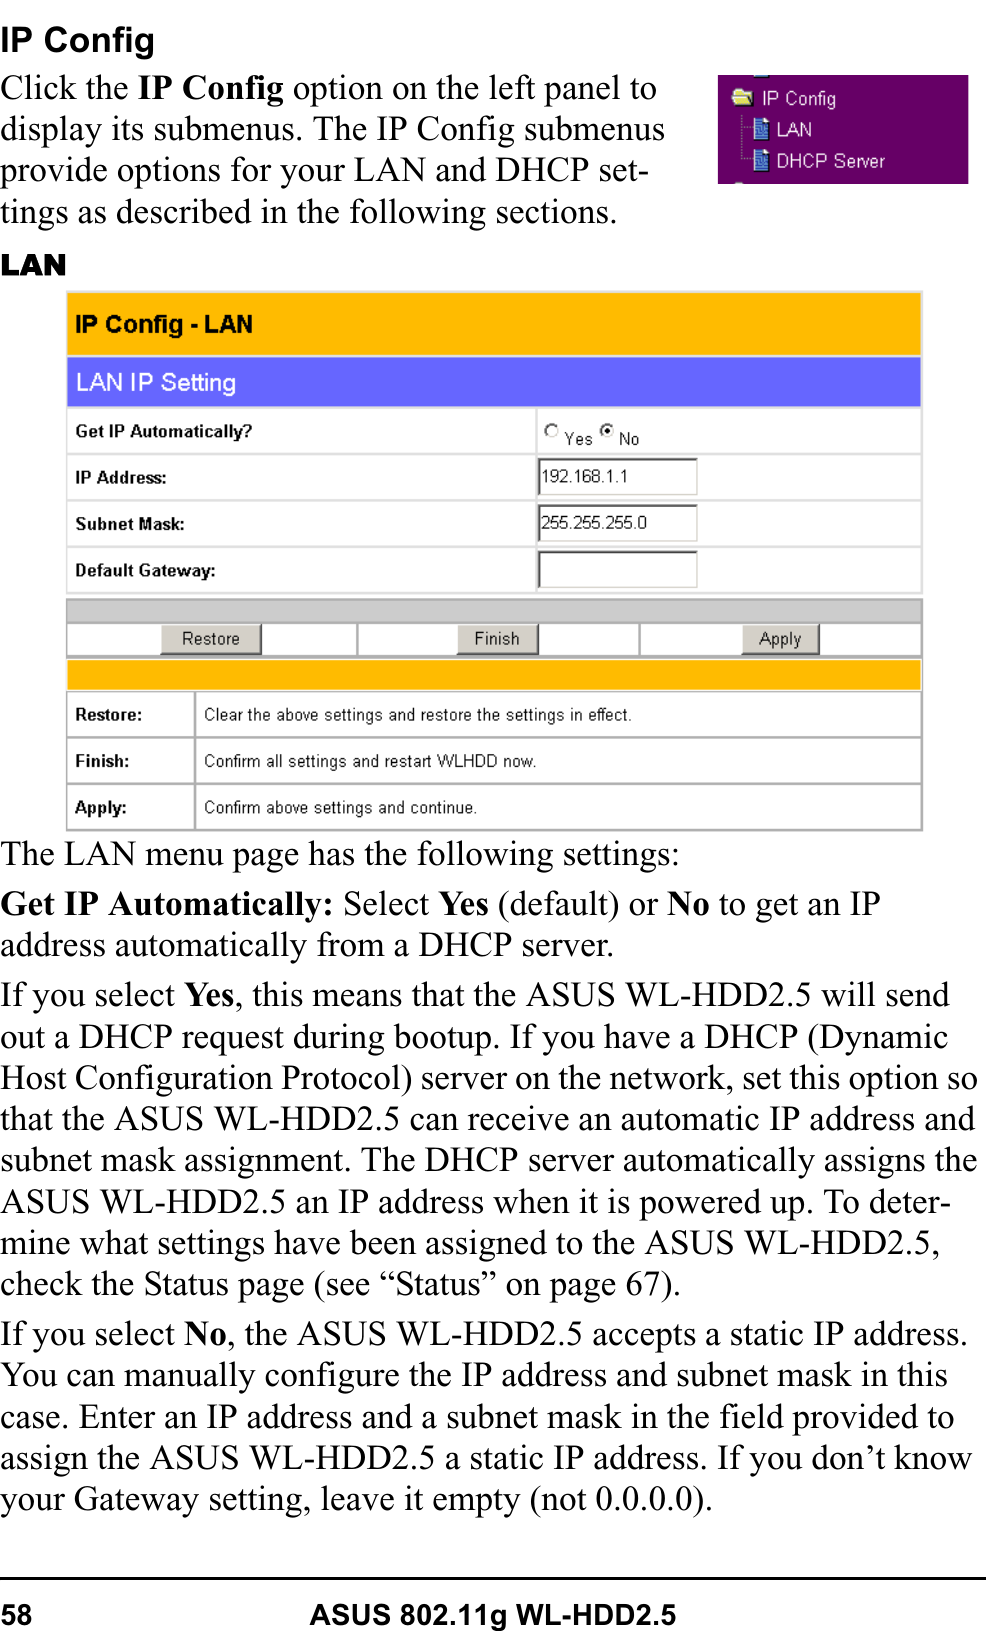 58 ASUS 802.11g WL-HDD2.5IP ConfigClick the IP Config option on the left panel to display its submenus. The IP Config submenus provide options for your LAN and DHCP set-tings as described in the following sections.LANThe LAN menu page has the following settings:Get IP Automatically: Select Ye s  (default) or No to get an IP address automatically from a DHCP server.If you select Ye s , this means that the ASUS WL-HDD2.5 will send out a DHCP request during bootup. If you have a DHCP (Dynamic Host Configuration Protocol) server on the network, set this option so that the ASUS WL-HDD2.5 can receive an automatic IP address and subnet mask assignment. The DHCP server automatically assigns the ASUS WL-HDD2.5 an IP address when it is powered up. To deter-mine what settings have been assigned to the ASUS WL-HDD2.5, check the Status page (see “Status” on page 67).If you select No, the ASUS WL-HDD2.5 accepts a static IP address. You can manually configure the IP address and subnet mask in this case. Enter an IP address and a subnet mask in the field provided to assign the ASUS WL-HDD2.5 a static IP address. If you don’t know your Gateway setting, leave it empty (not 0.0.0.0).